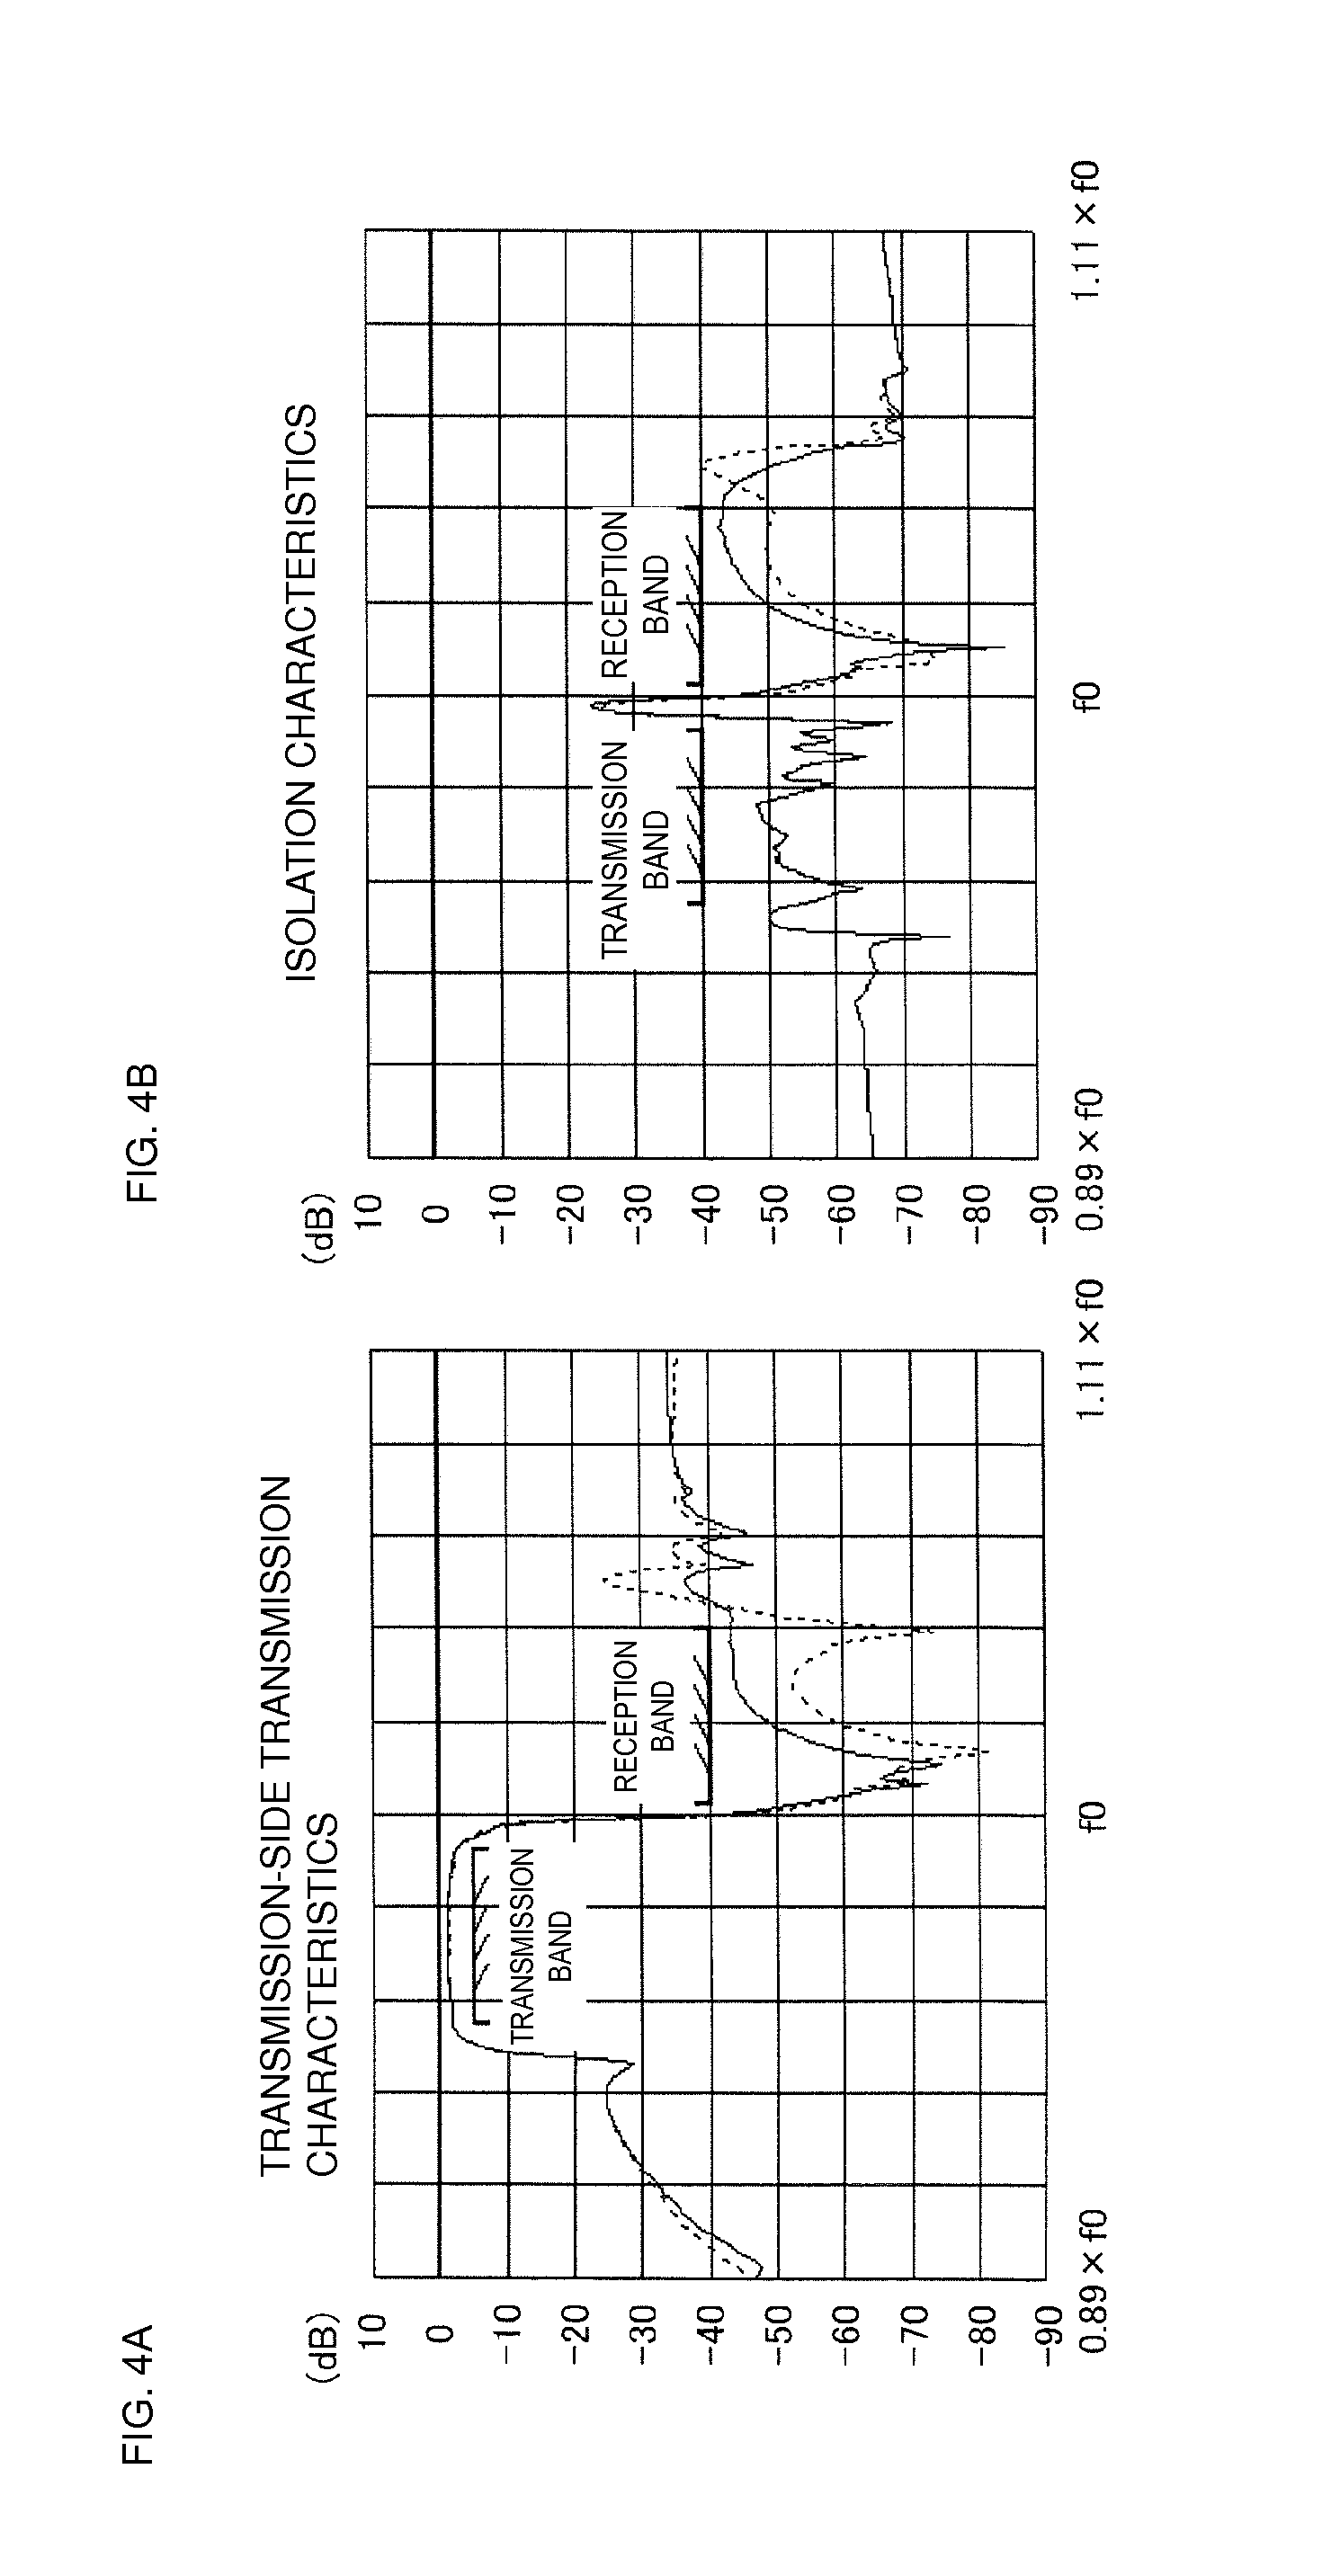 Signal separation device